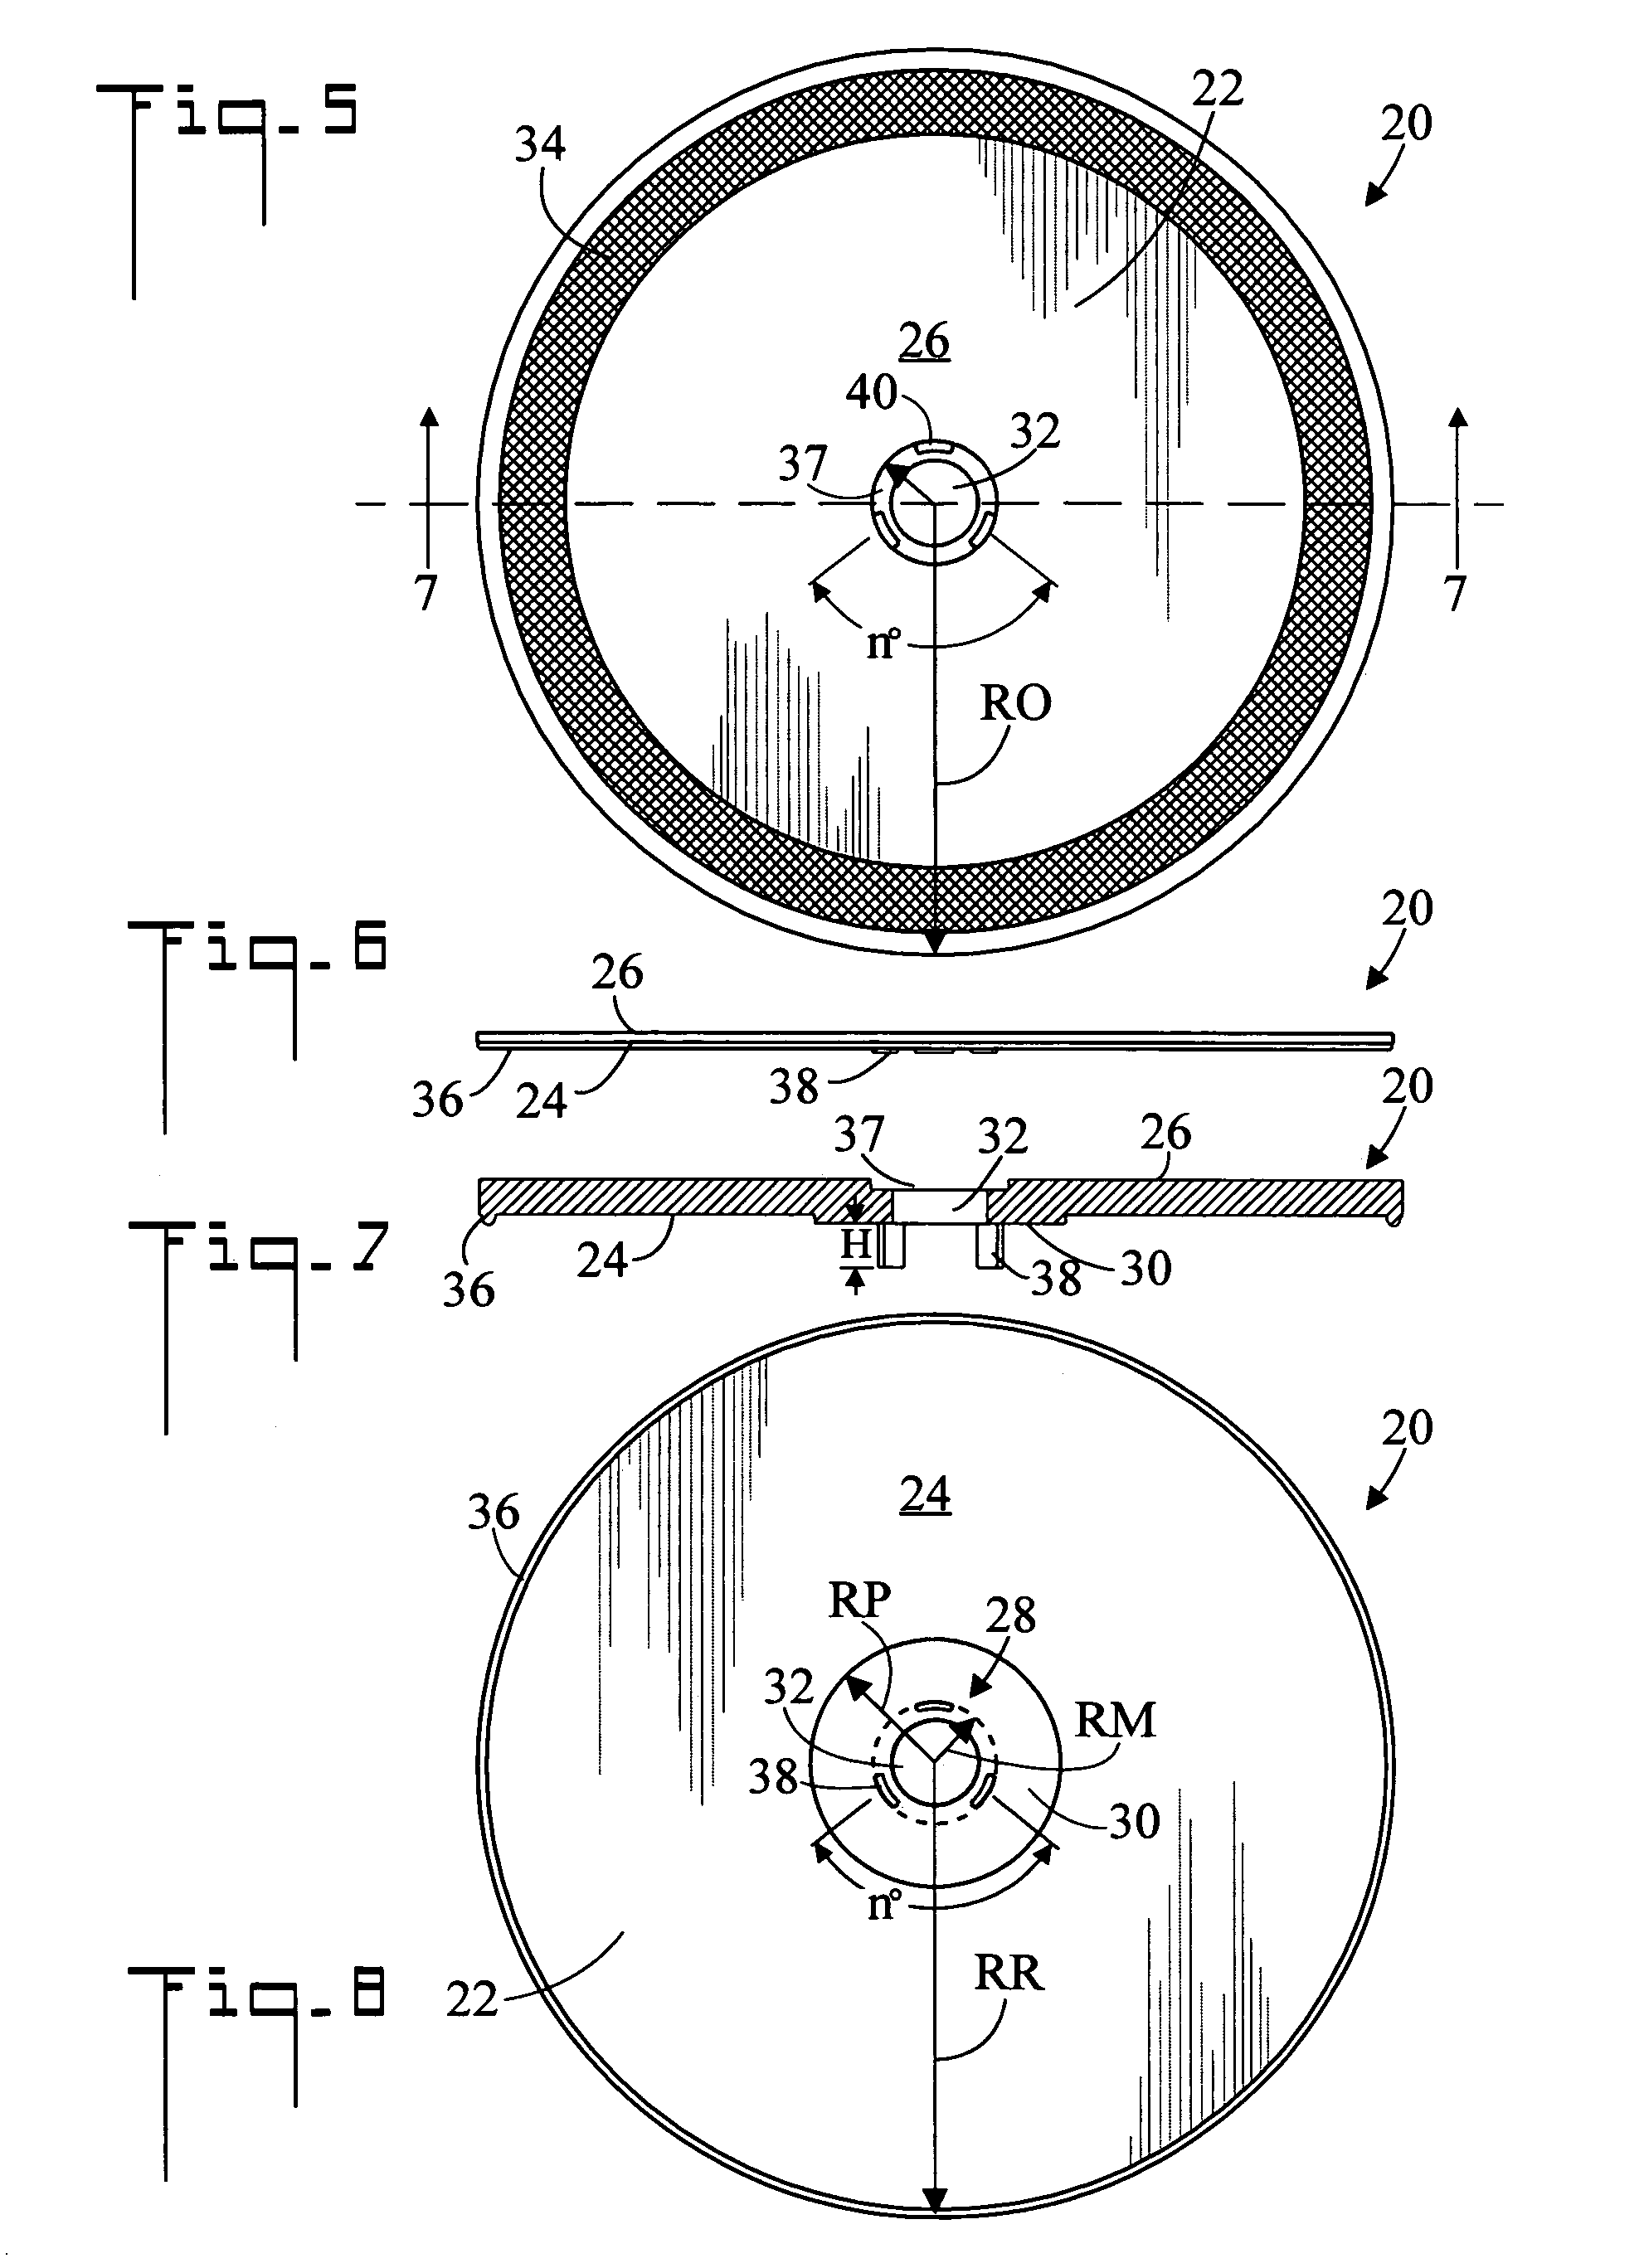 Protective cover for a data storage disc and method of use